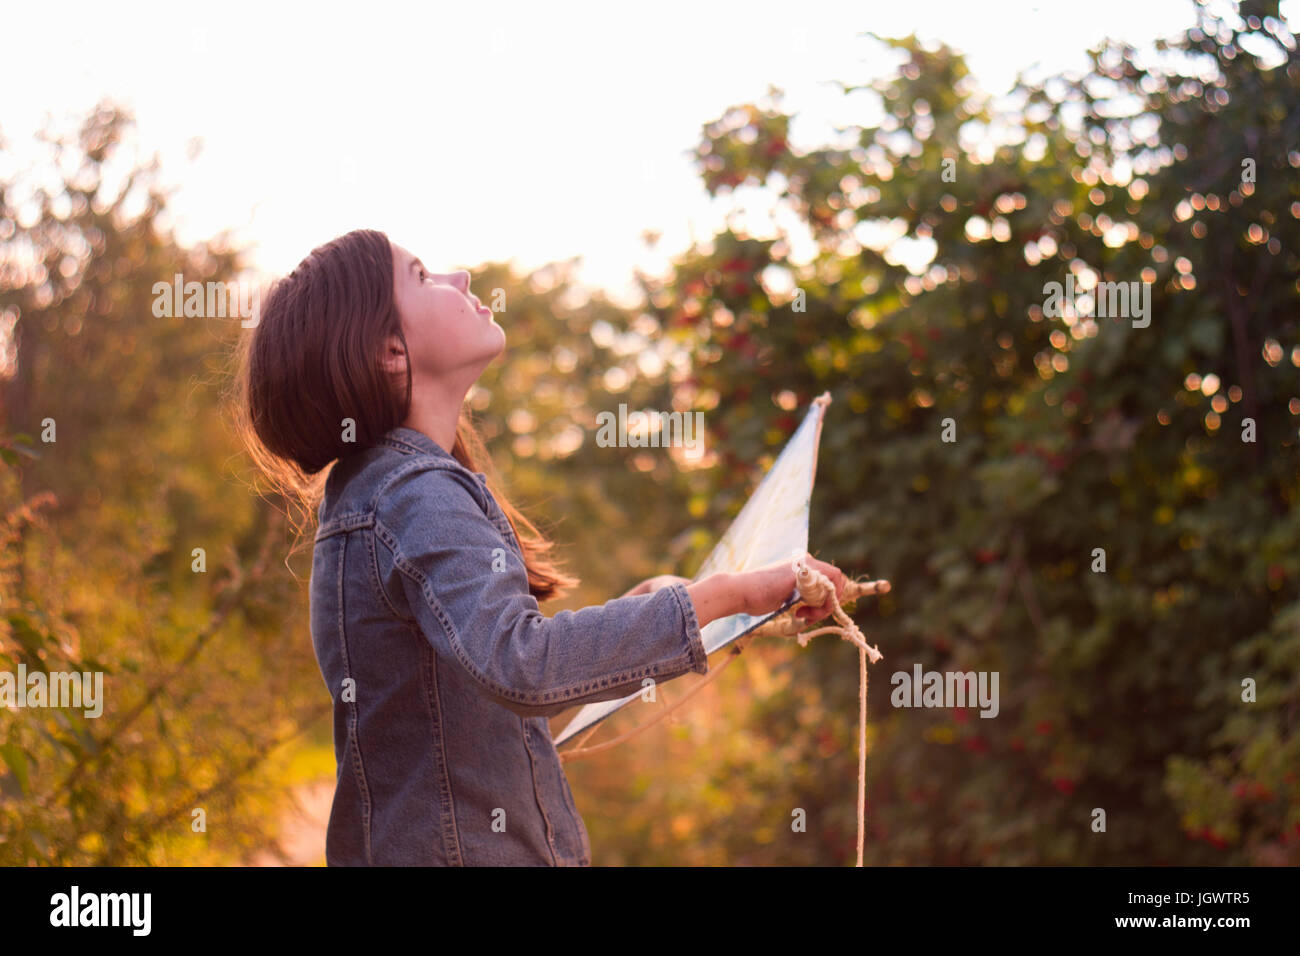 Teenage girl holding kite looking up at sky Stock Photo